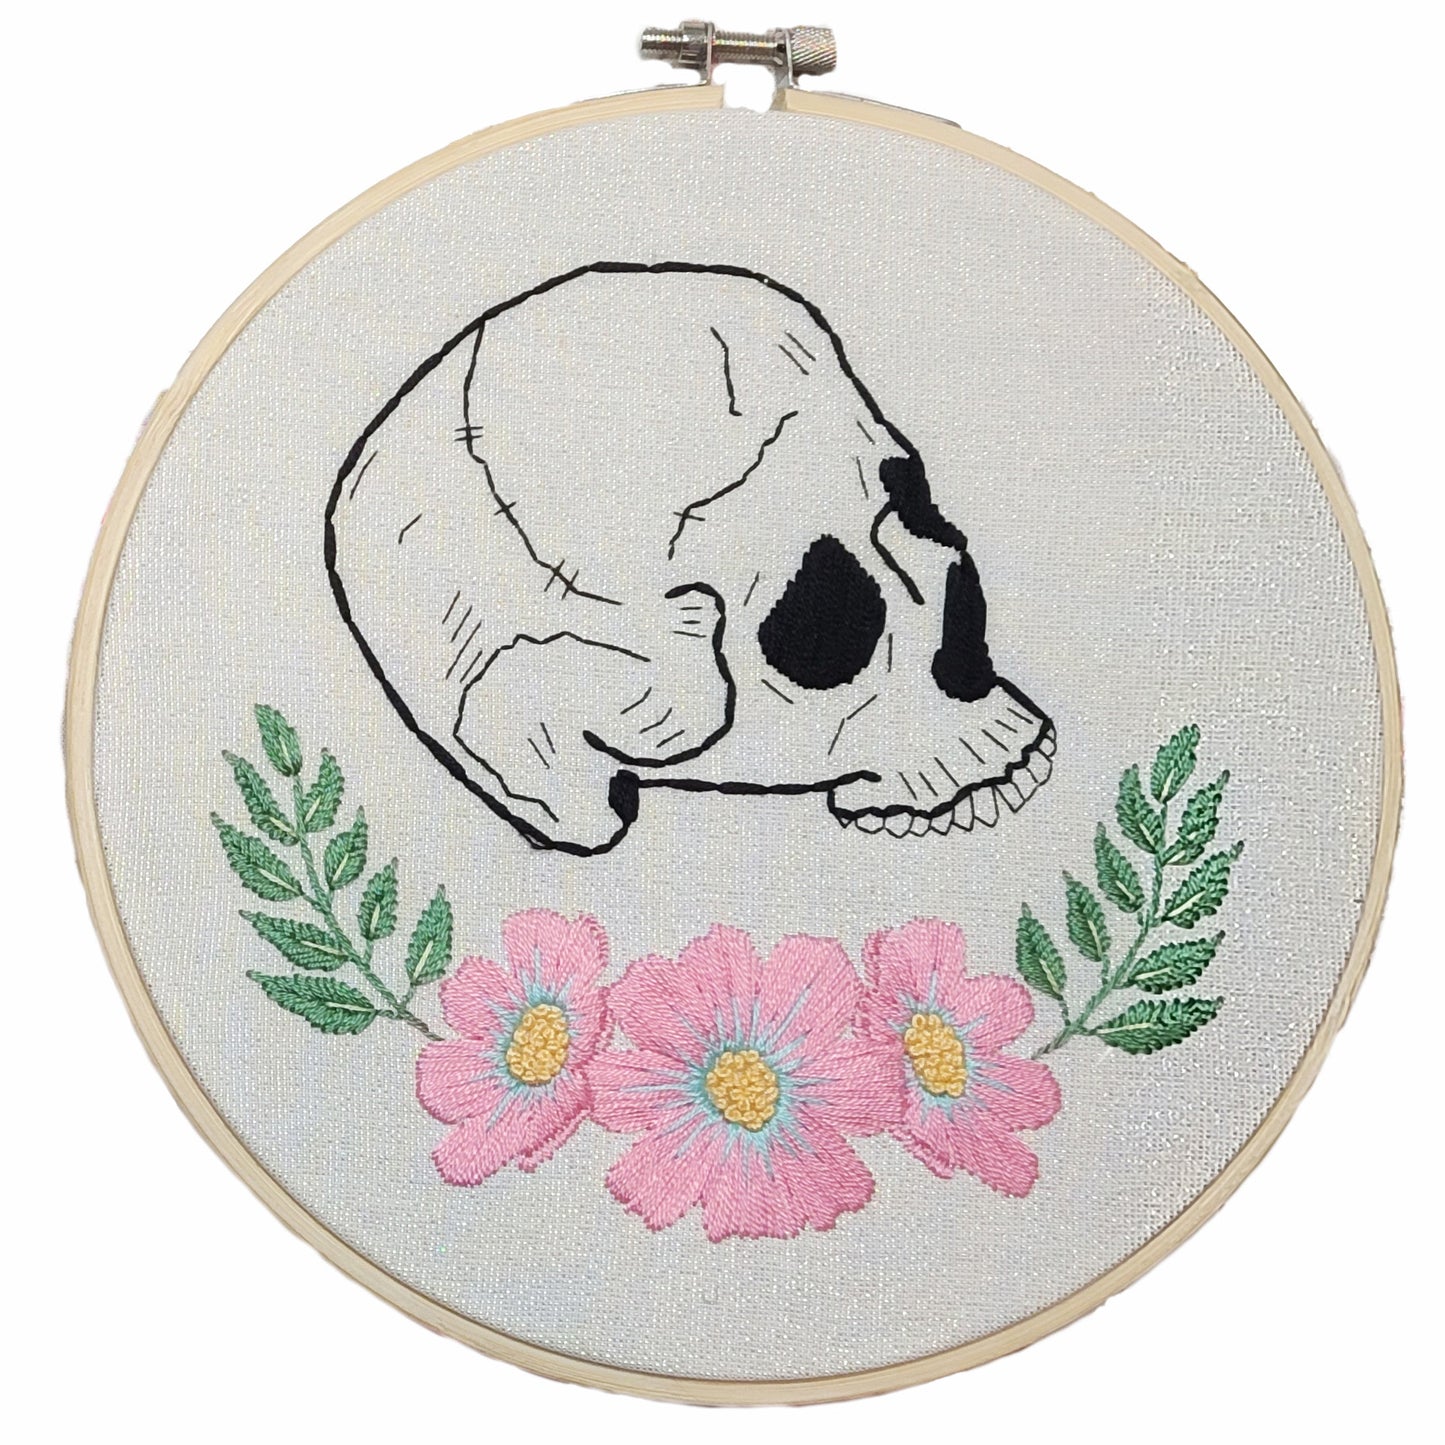 Black on White Skull Finished Hand Embroidery, 7"